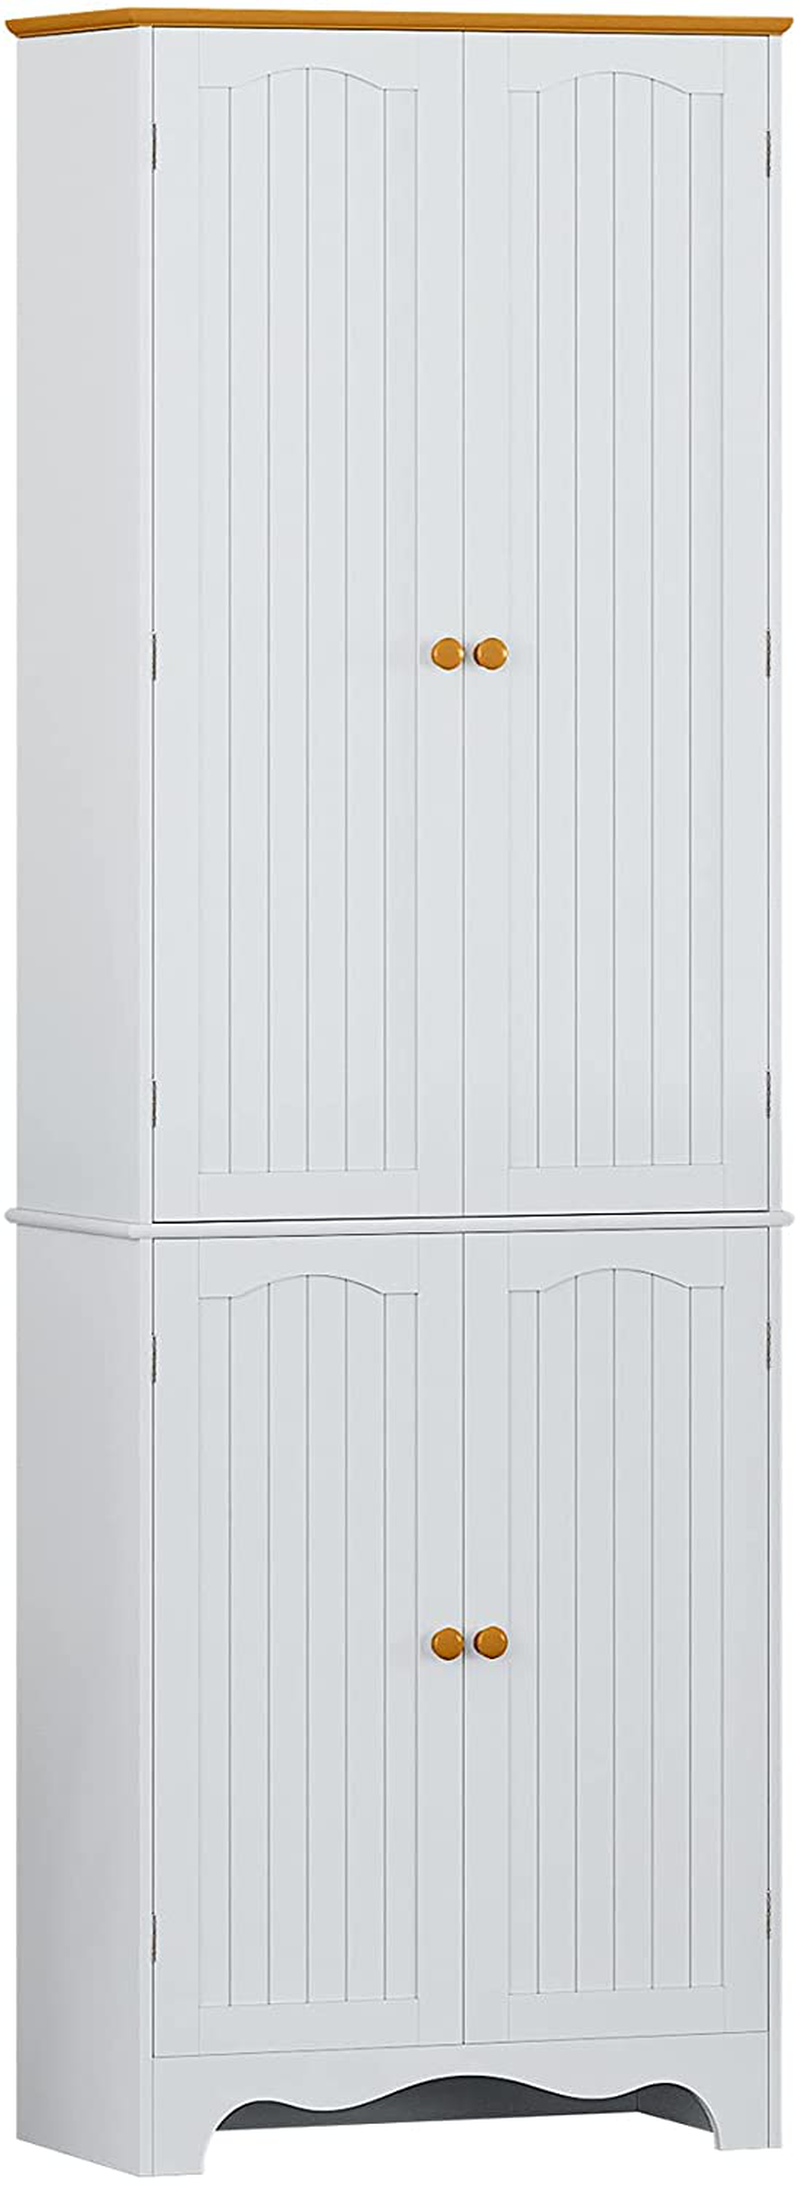 HOMEFORT 72" Tall Pantry Cabinet, Wood Kitchen Pantry, Freestanding Kitchen Cupboard with 2 Cabinets and Adjustable Storage Shelves, Space Saving Floor Cabinet,In Creamy White